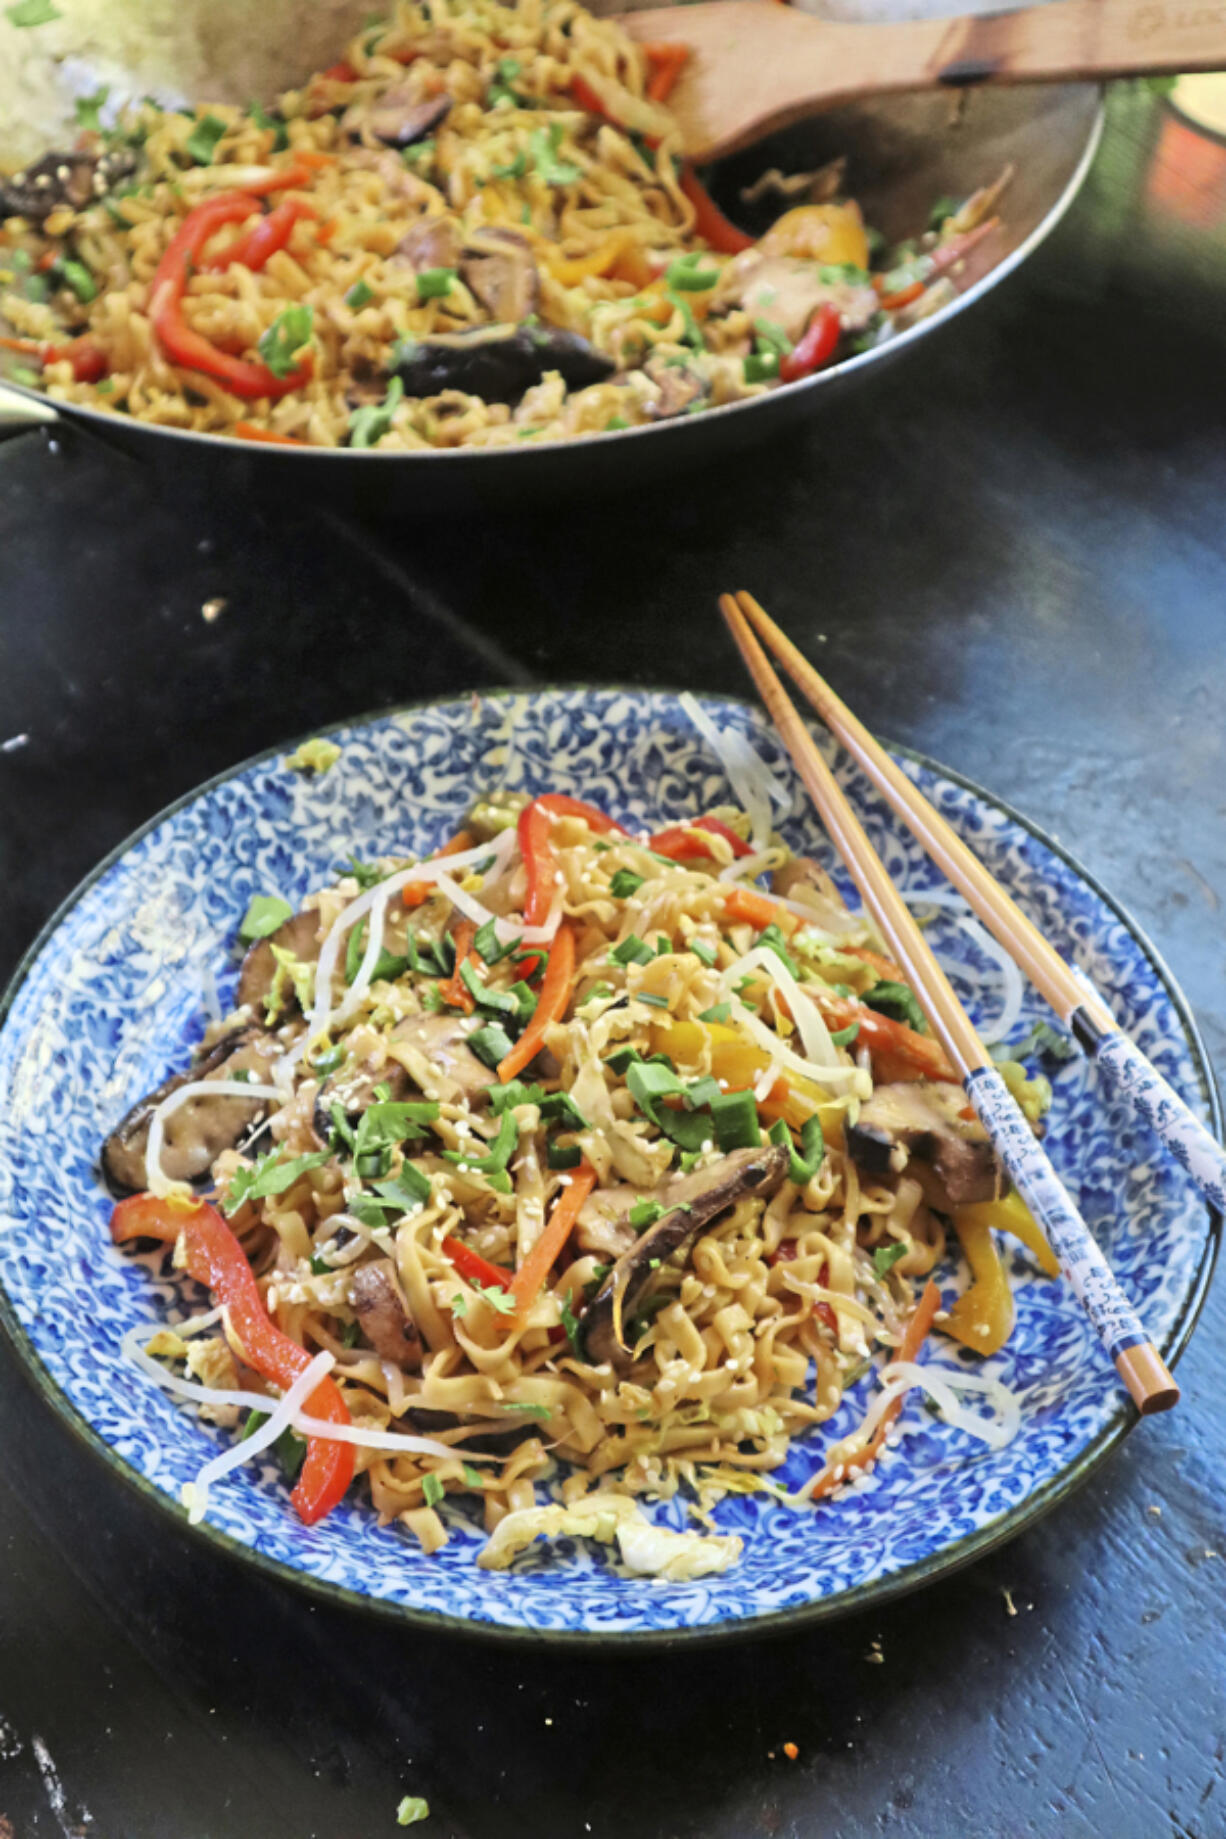 Shiitake mushrooms stand in for beef in this veggie-forward chow mein.